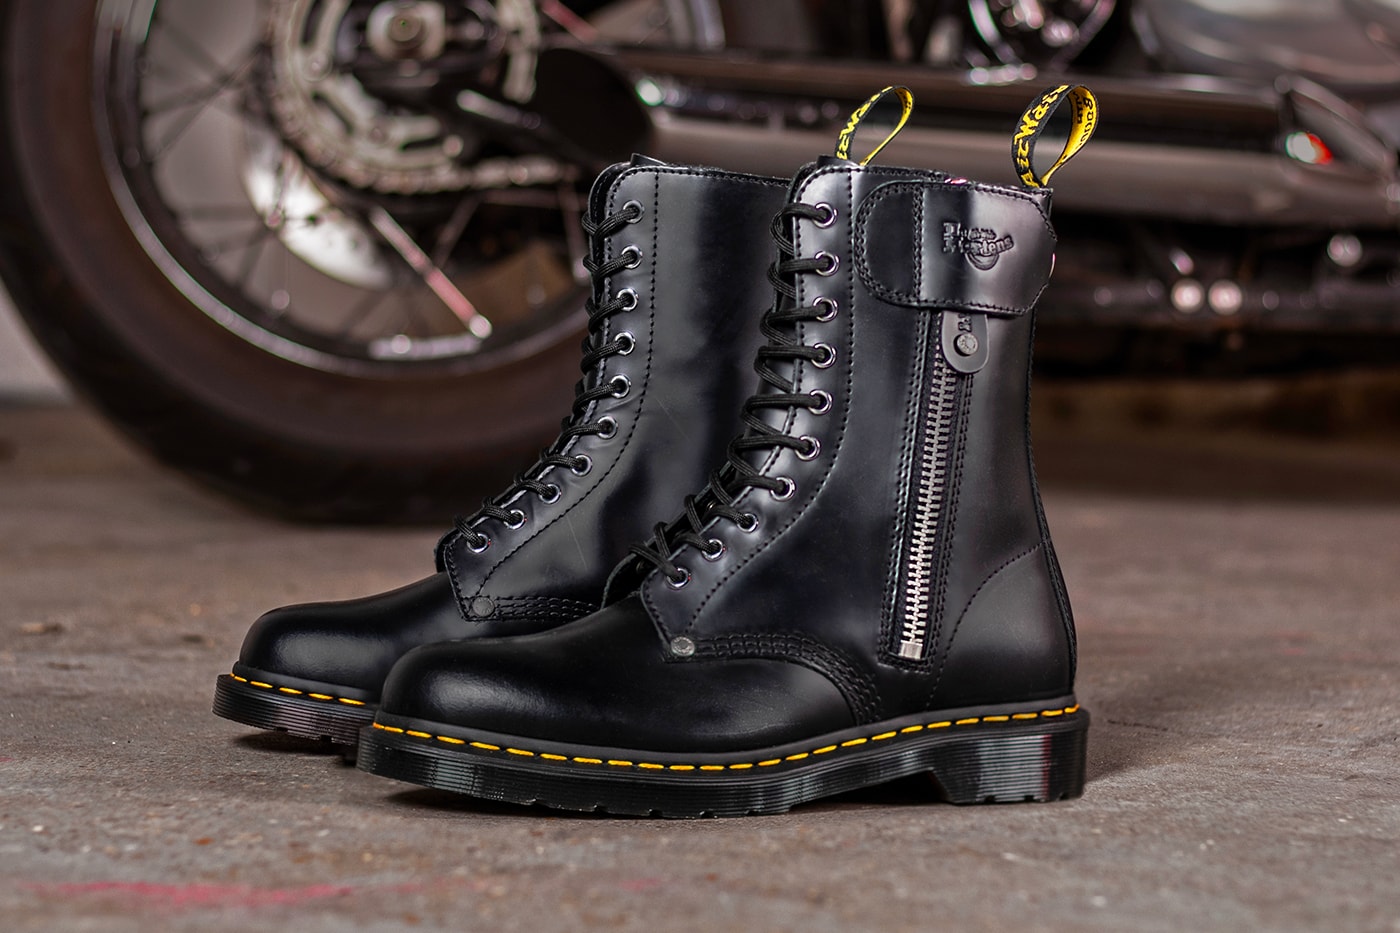 Schott NYC Dr. Martens 1460 1490 Boot Release boots footwear shoes leather star studs collaboration leather jacket biker